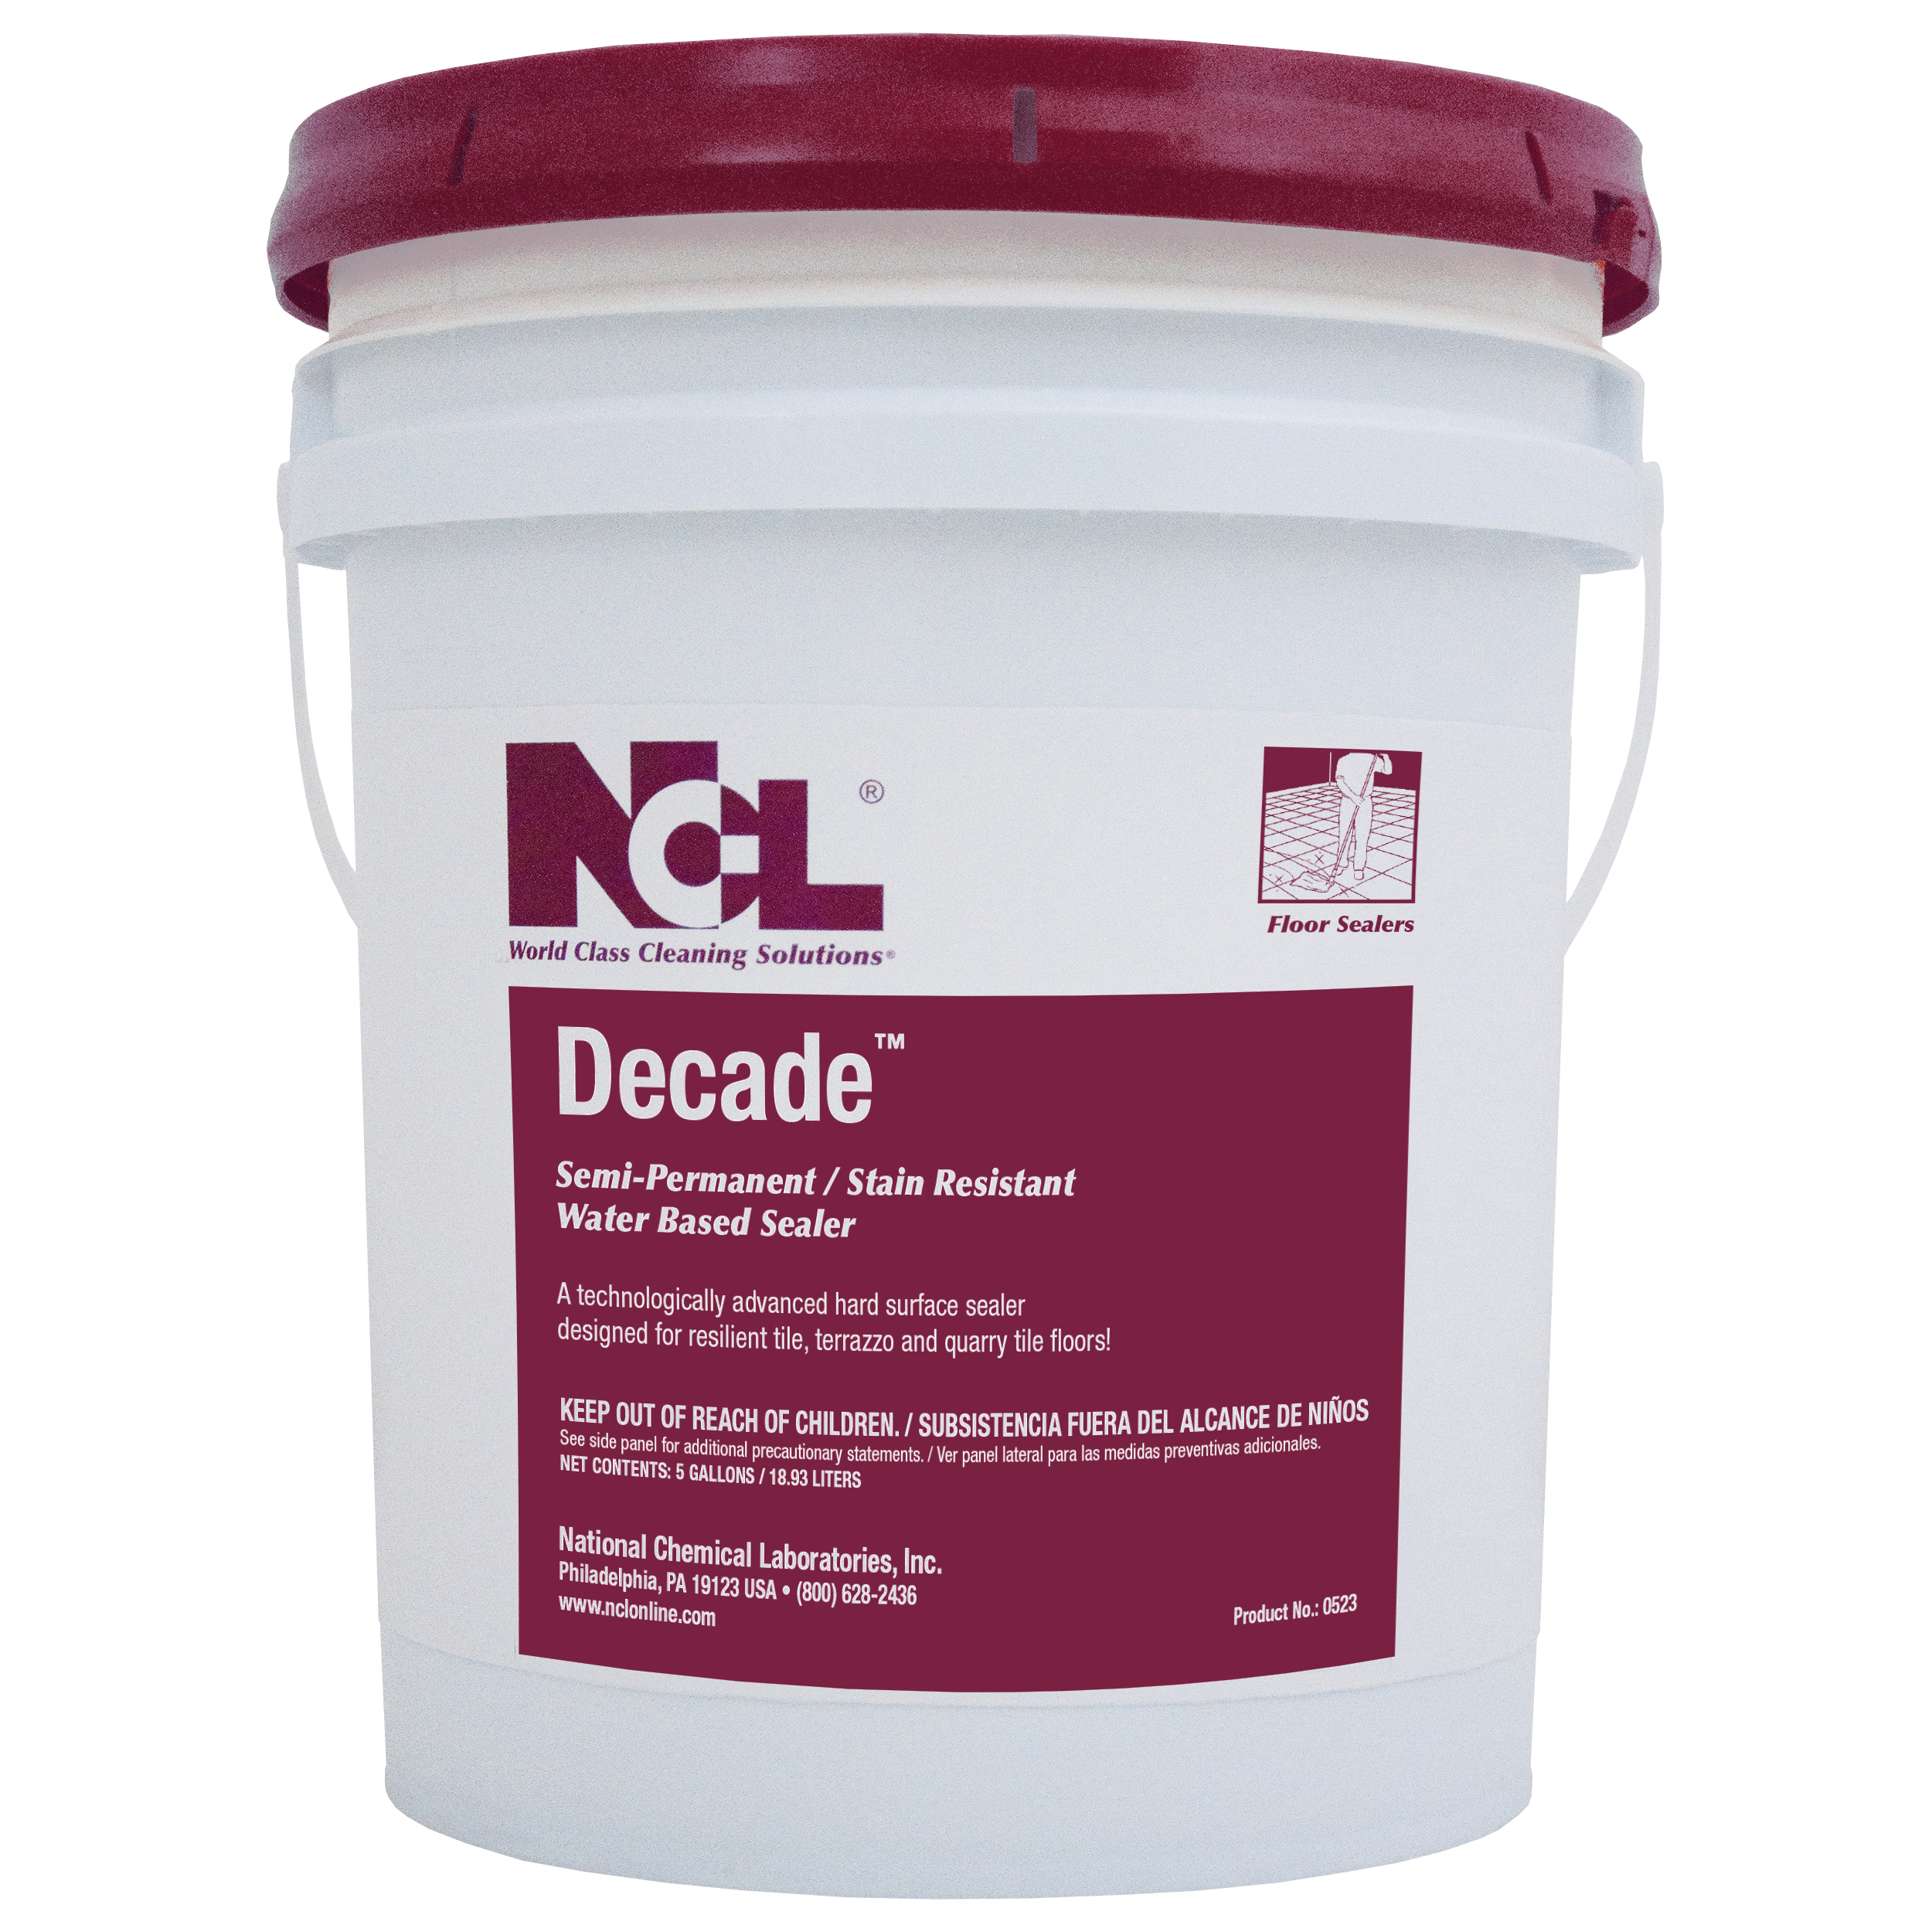  DECADE Semi-Permanent / Stain Resistant Water Based Sealer 5 Gal. Pail (NCL0523-21) 